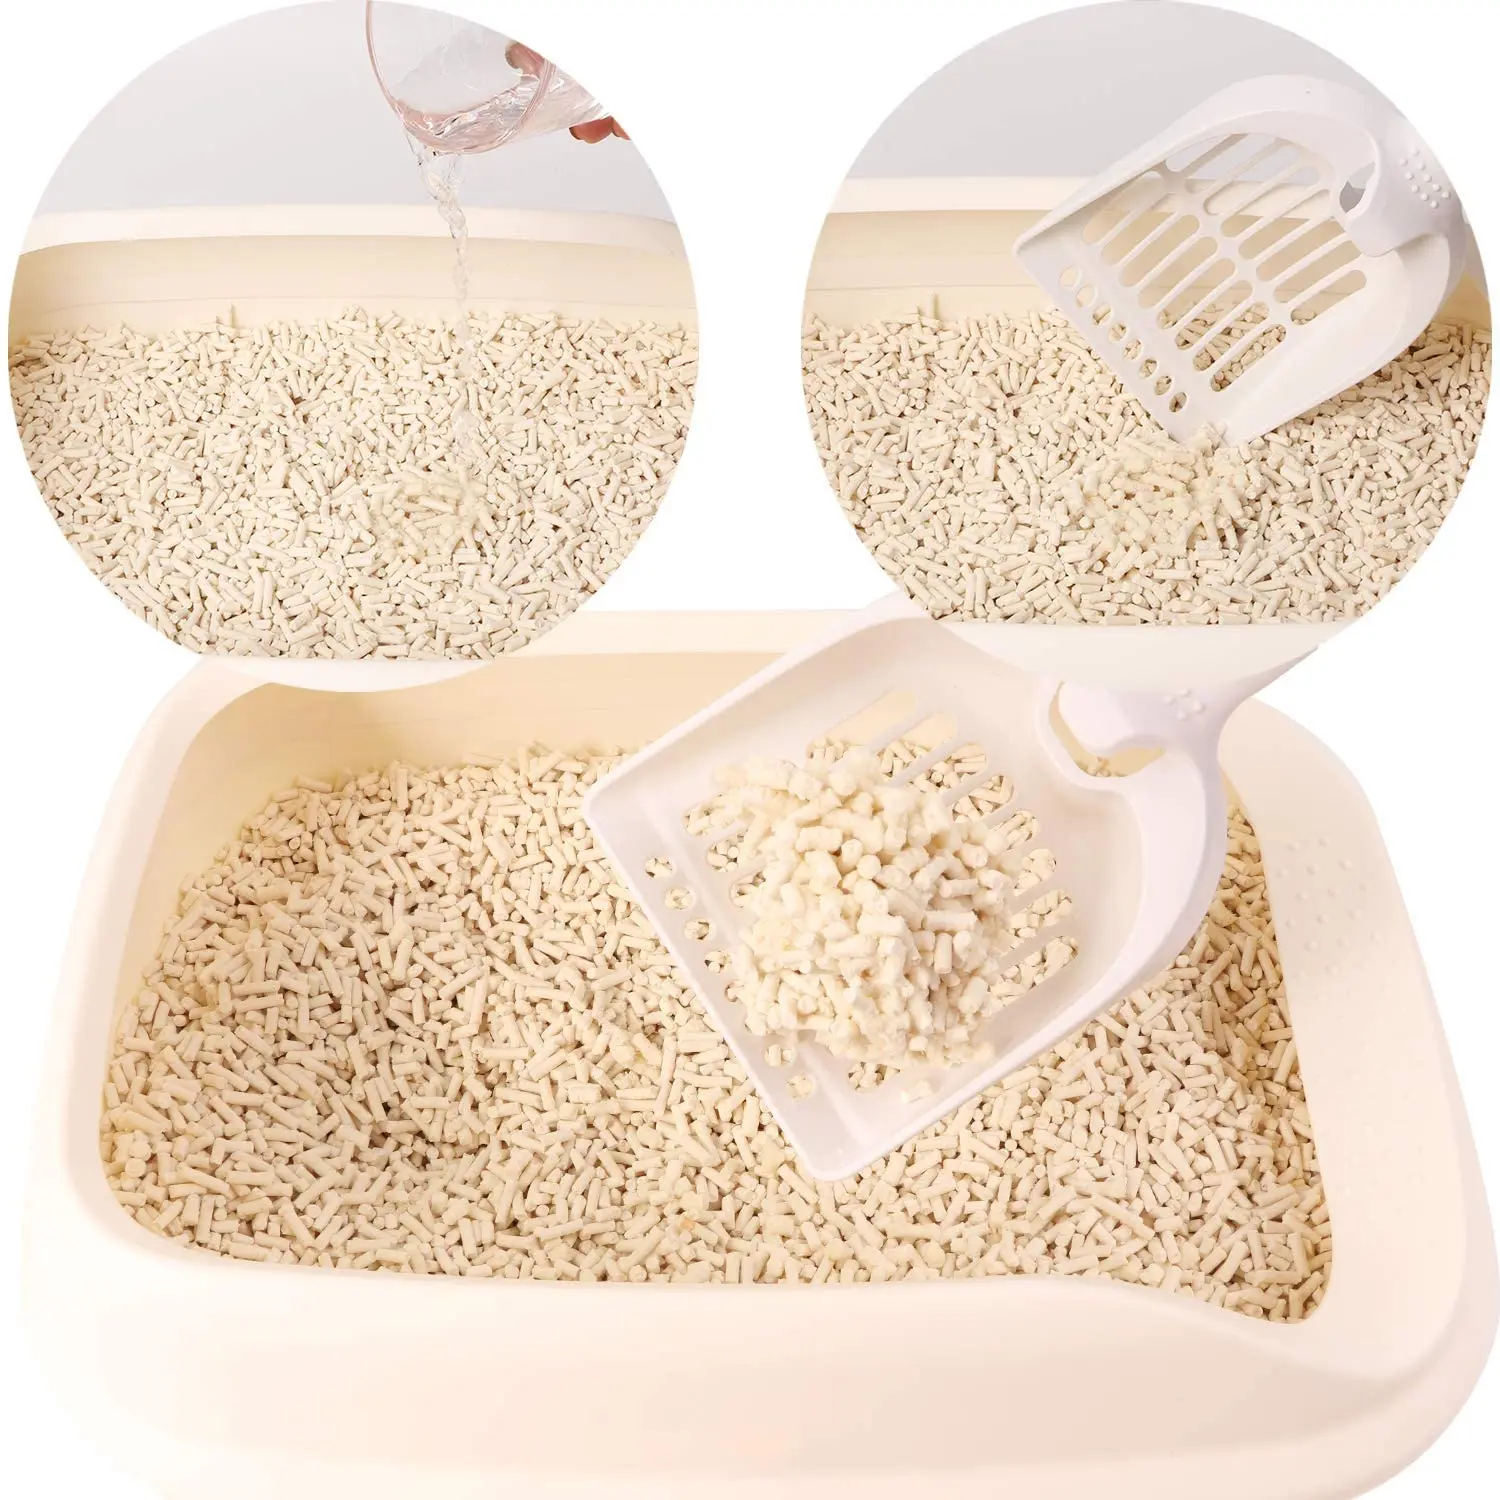 

Recommended by North American Families Particle diameter 1.5 mm Clumping Plant deodorization tofu litter for hamster